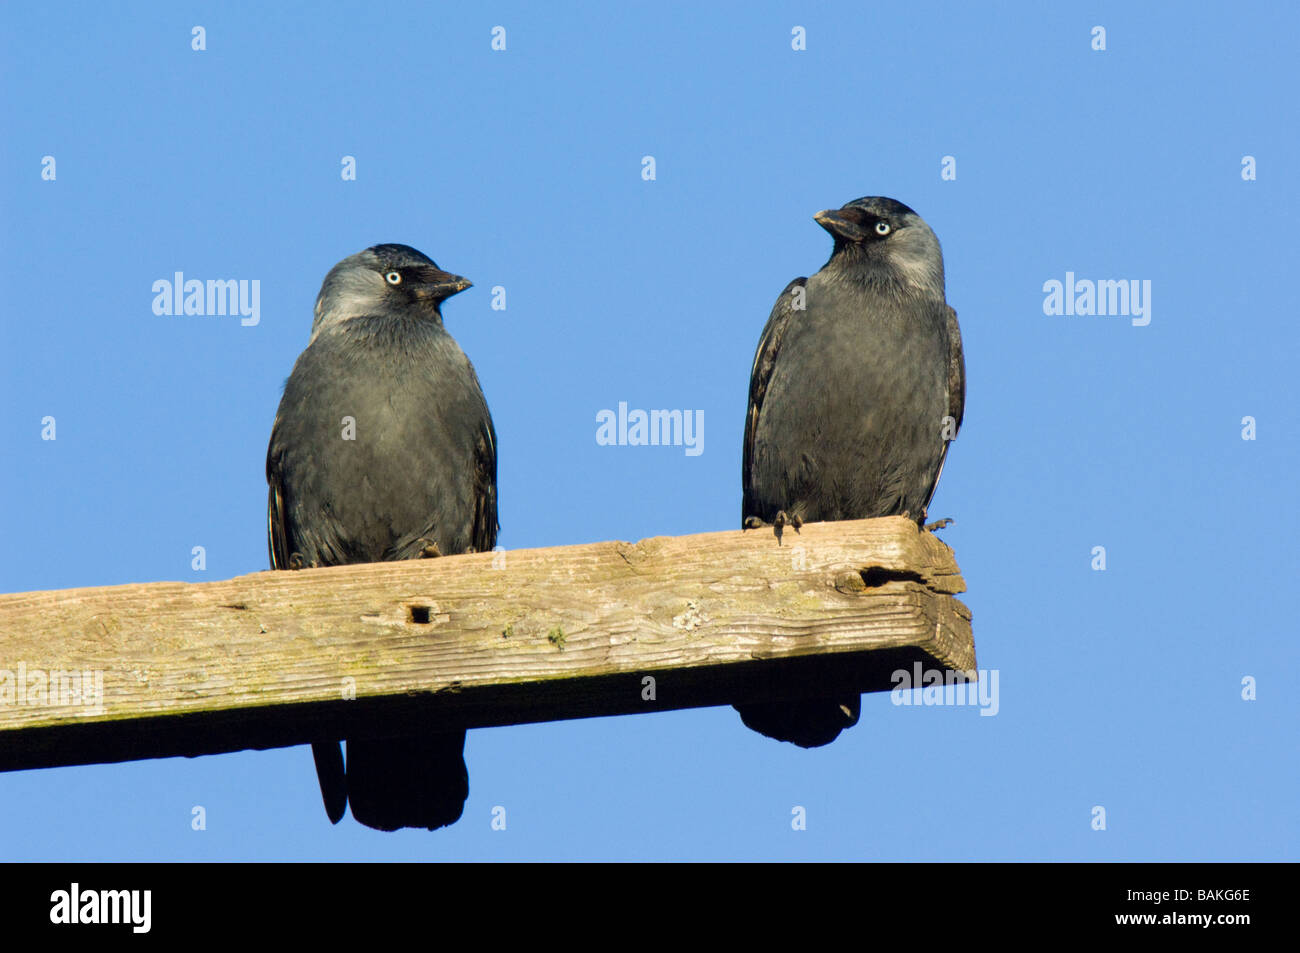 Jackdaw, Corvus monedula, a pair perched together on a wooden beam against a blue sky Stock Photo